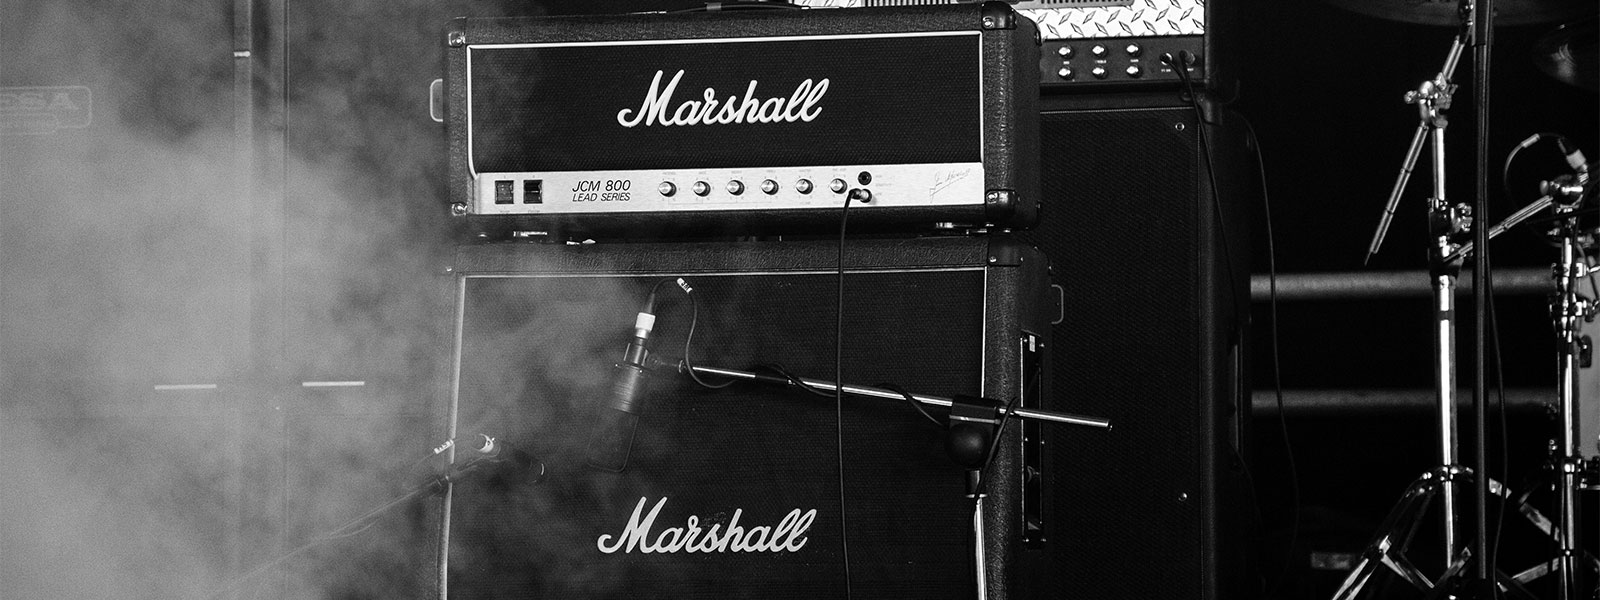 Marshall Amplifier on Stage